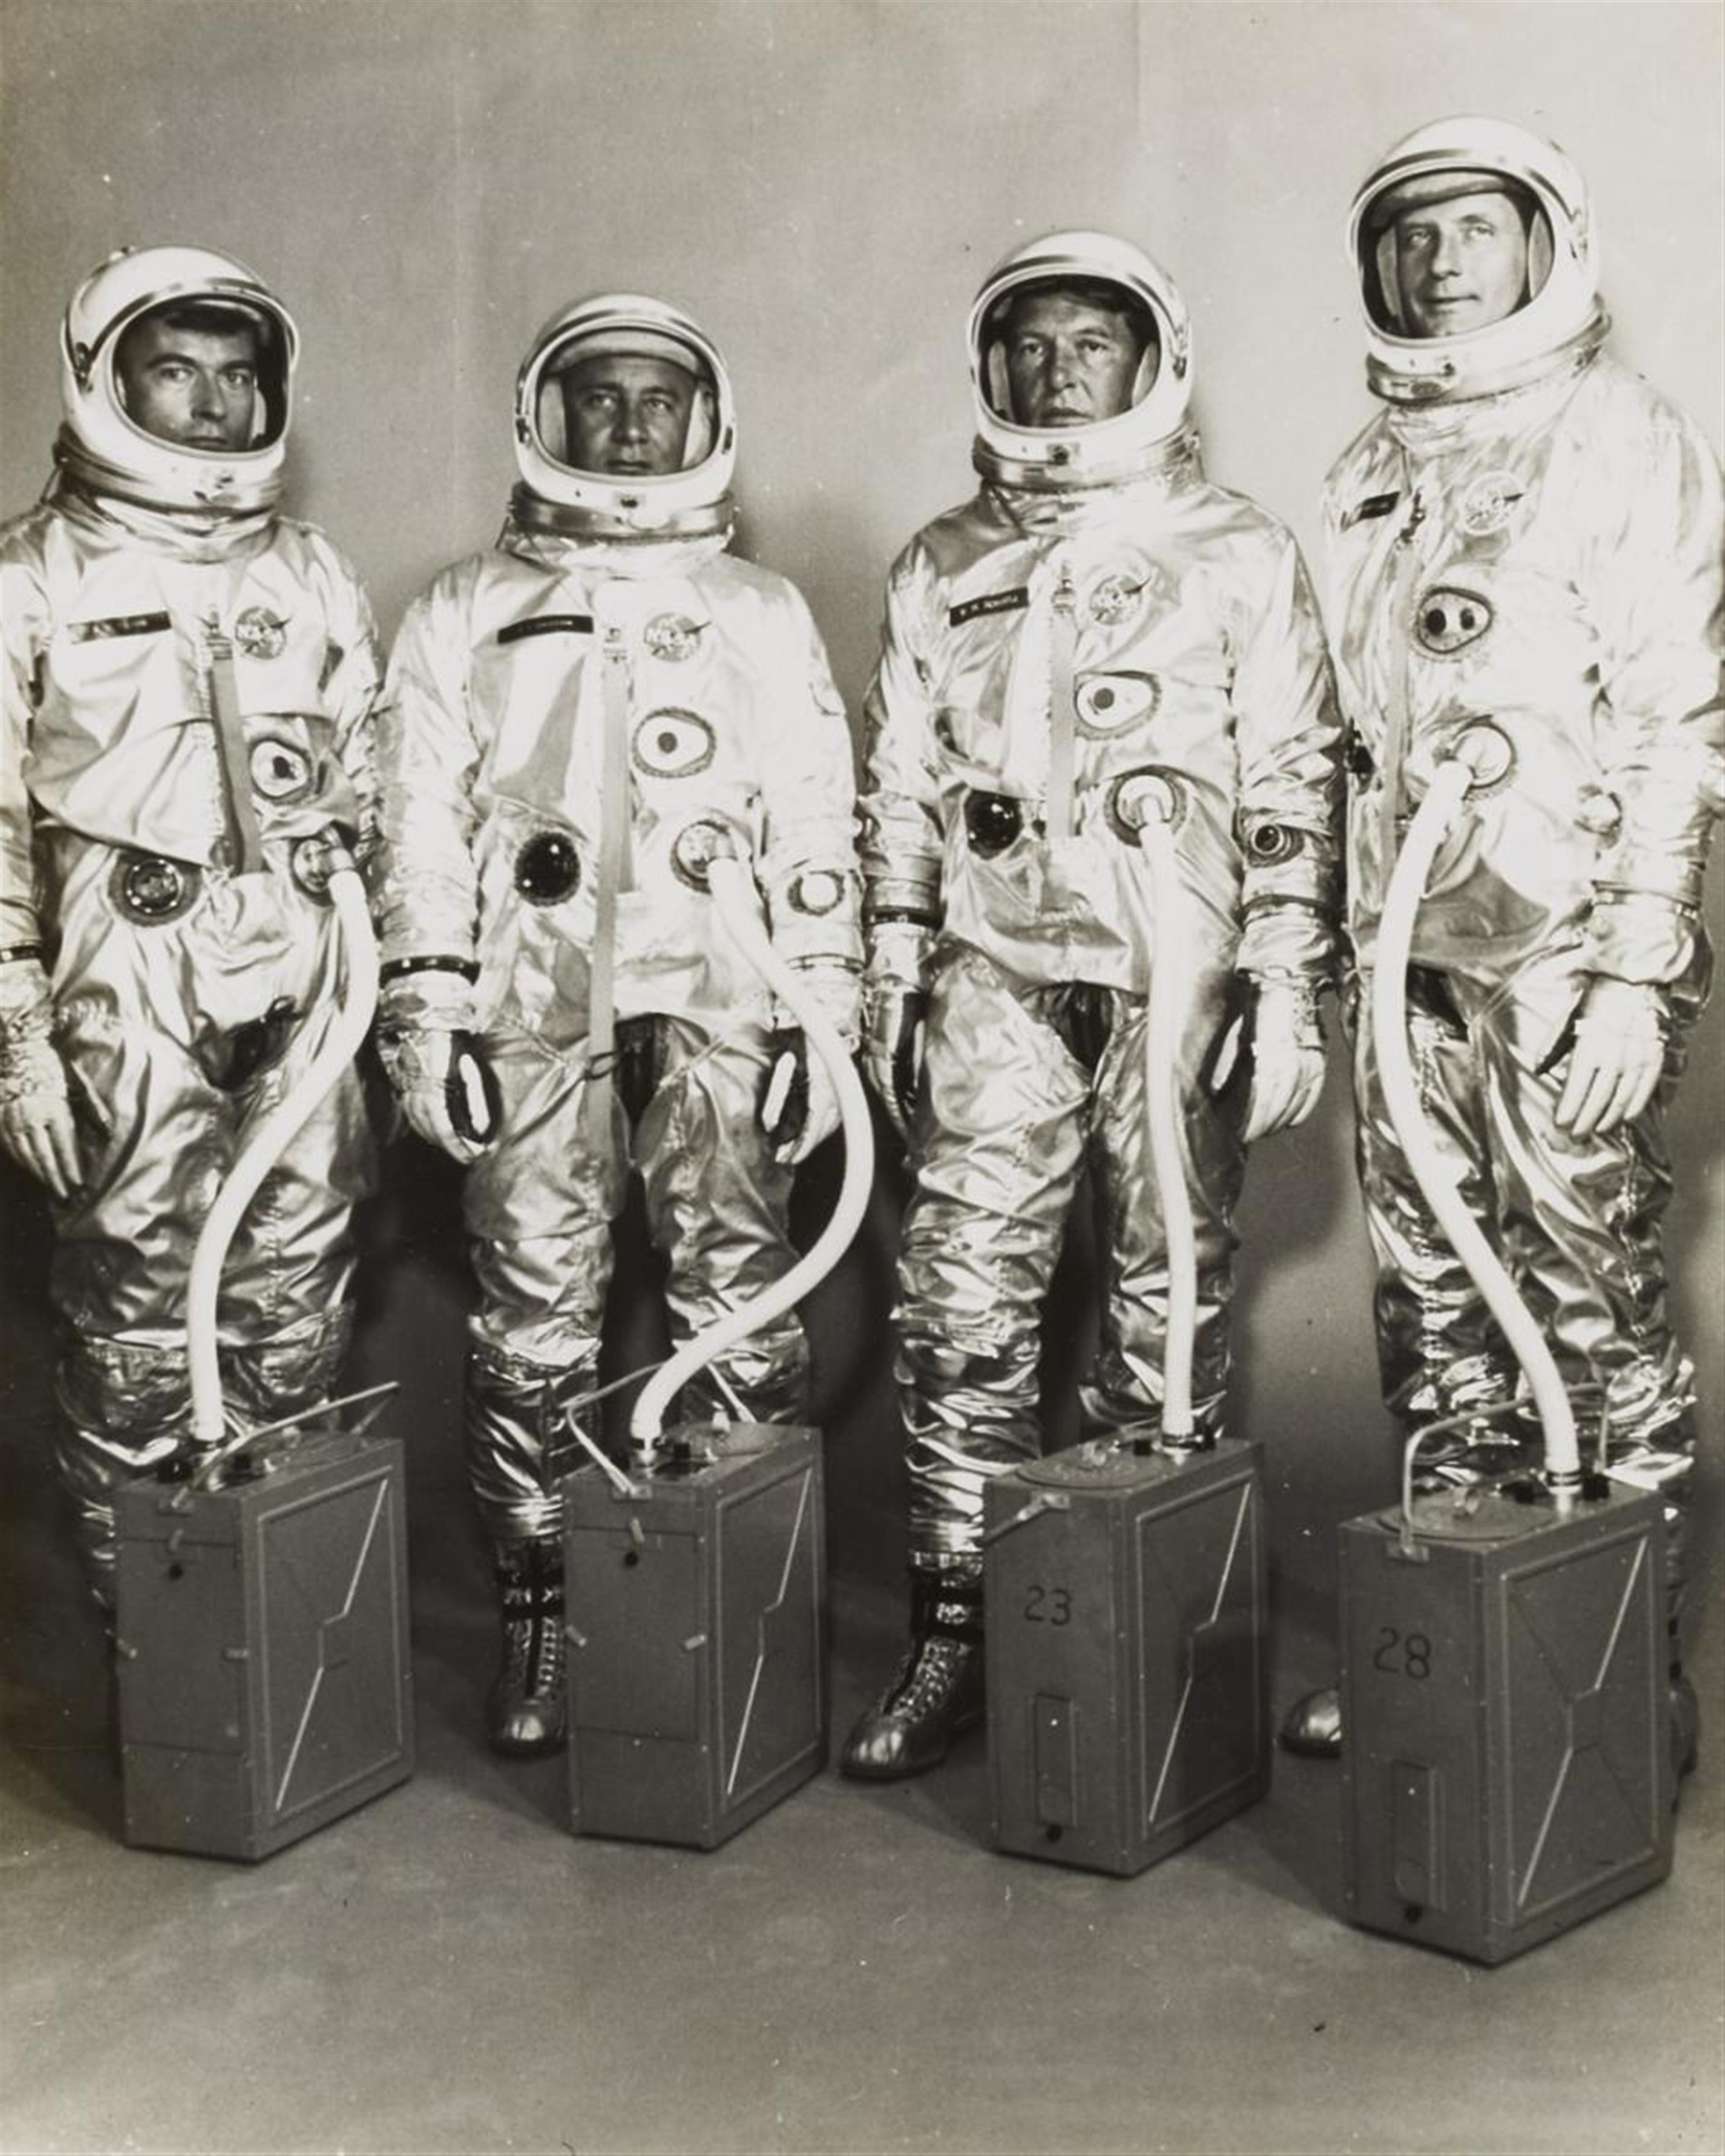 NASA - Astronauts Young, Grissom, Schirra and Stafford pose in their spacesuits after being selected for the first Gemini manned mission - image-1